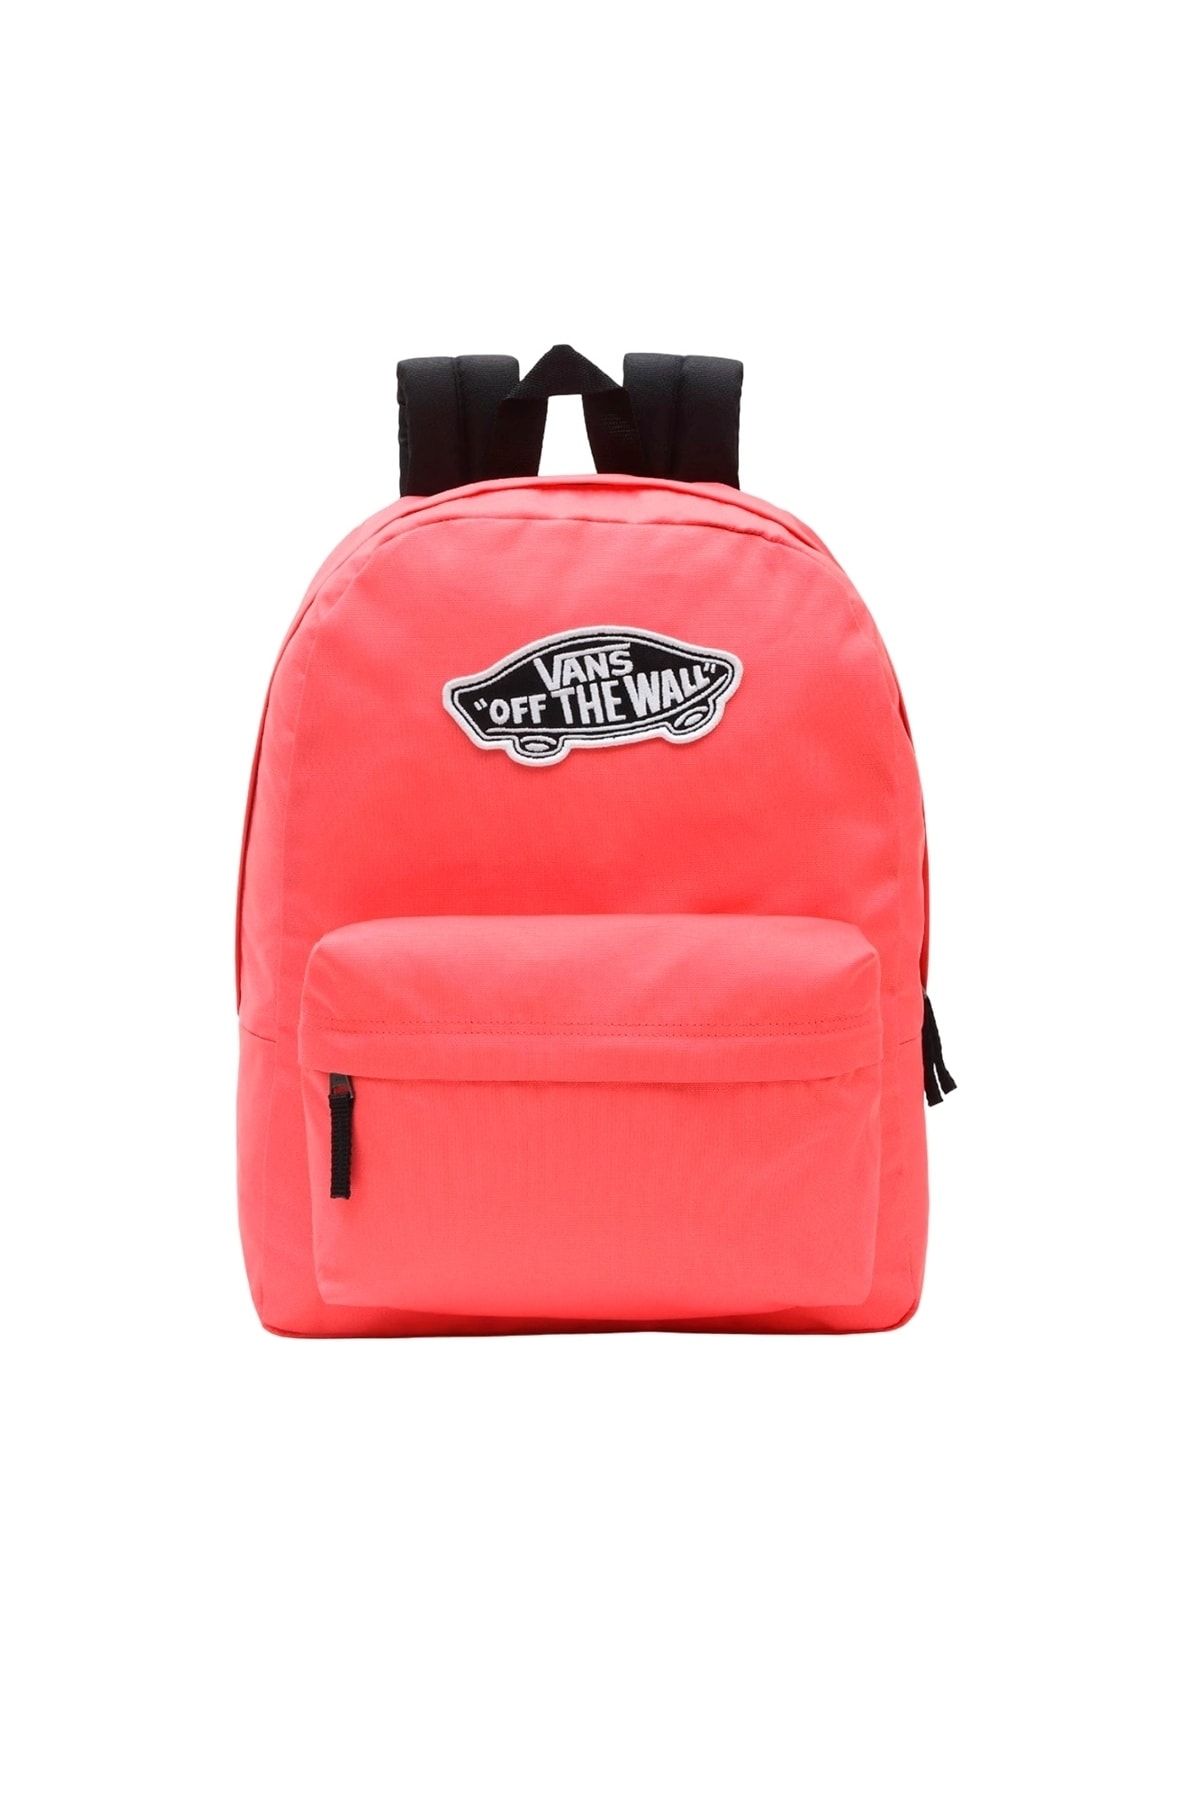 Vans Wm Realm Backpack Calypso Coral Vn0a3uı6snq1